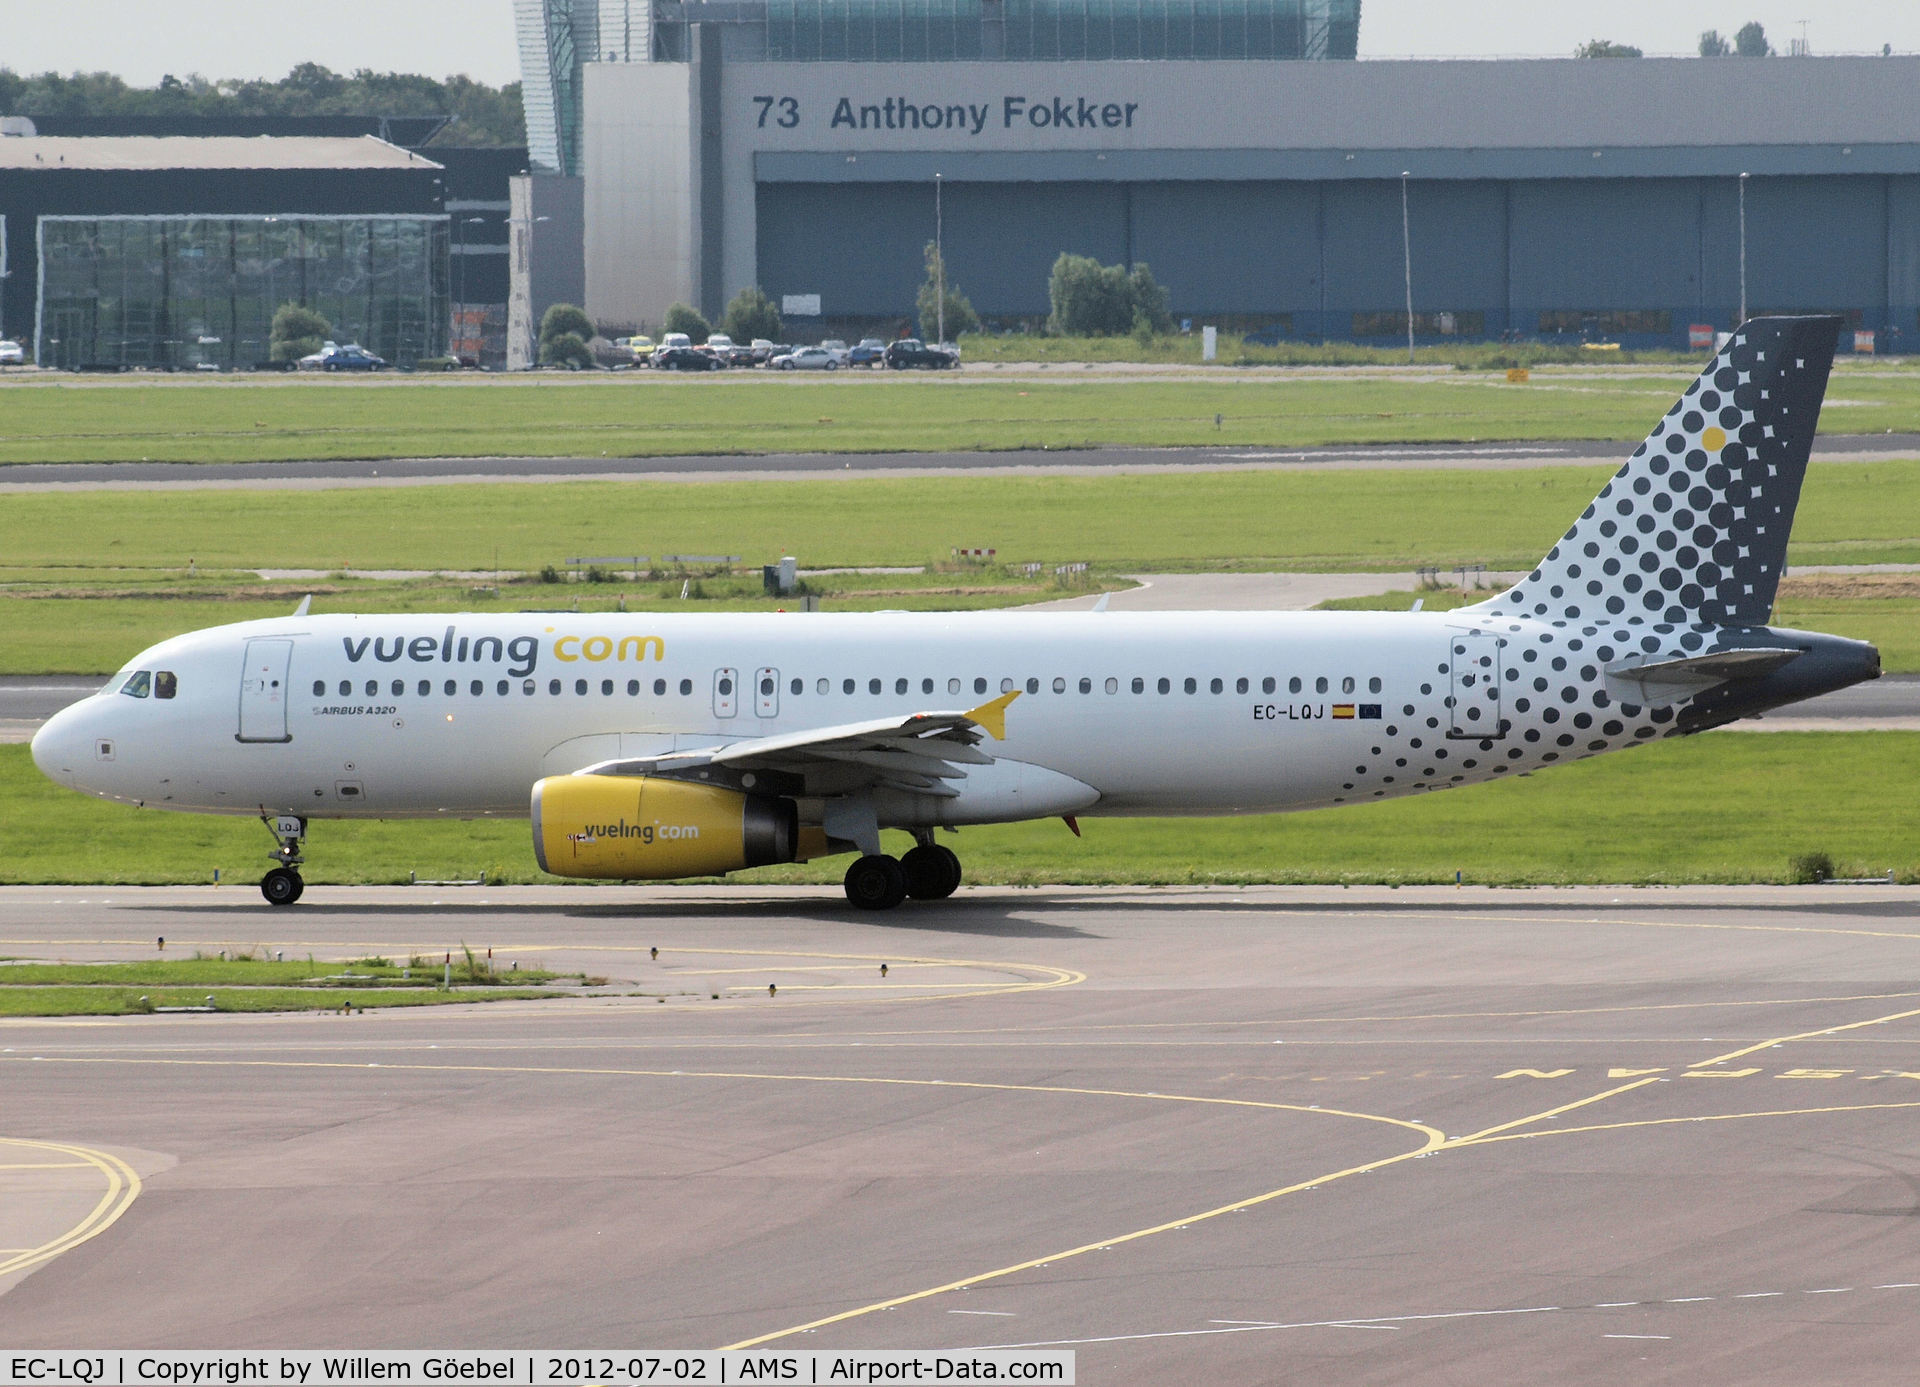 EC-LQJ, 2003 Airbus A320-232 C/N 1979, Taxi to runway 24 of Schiphol Airport